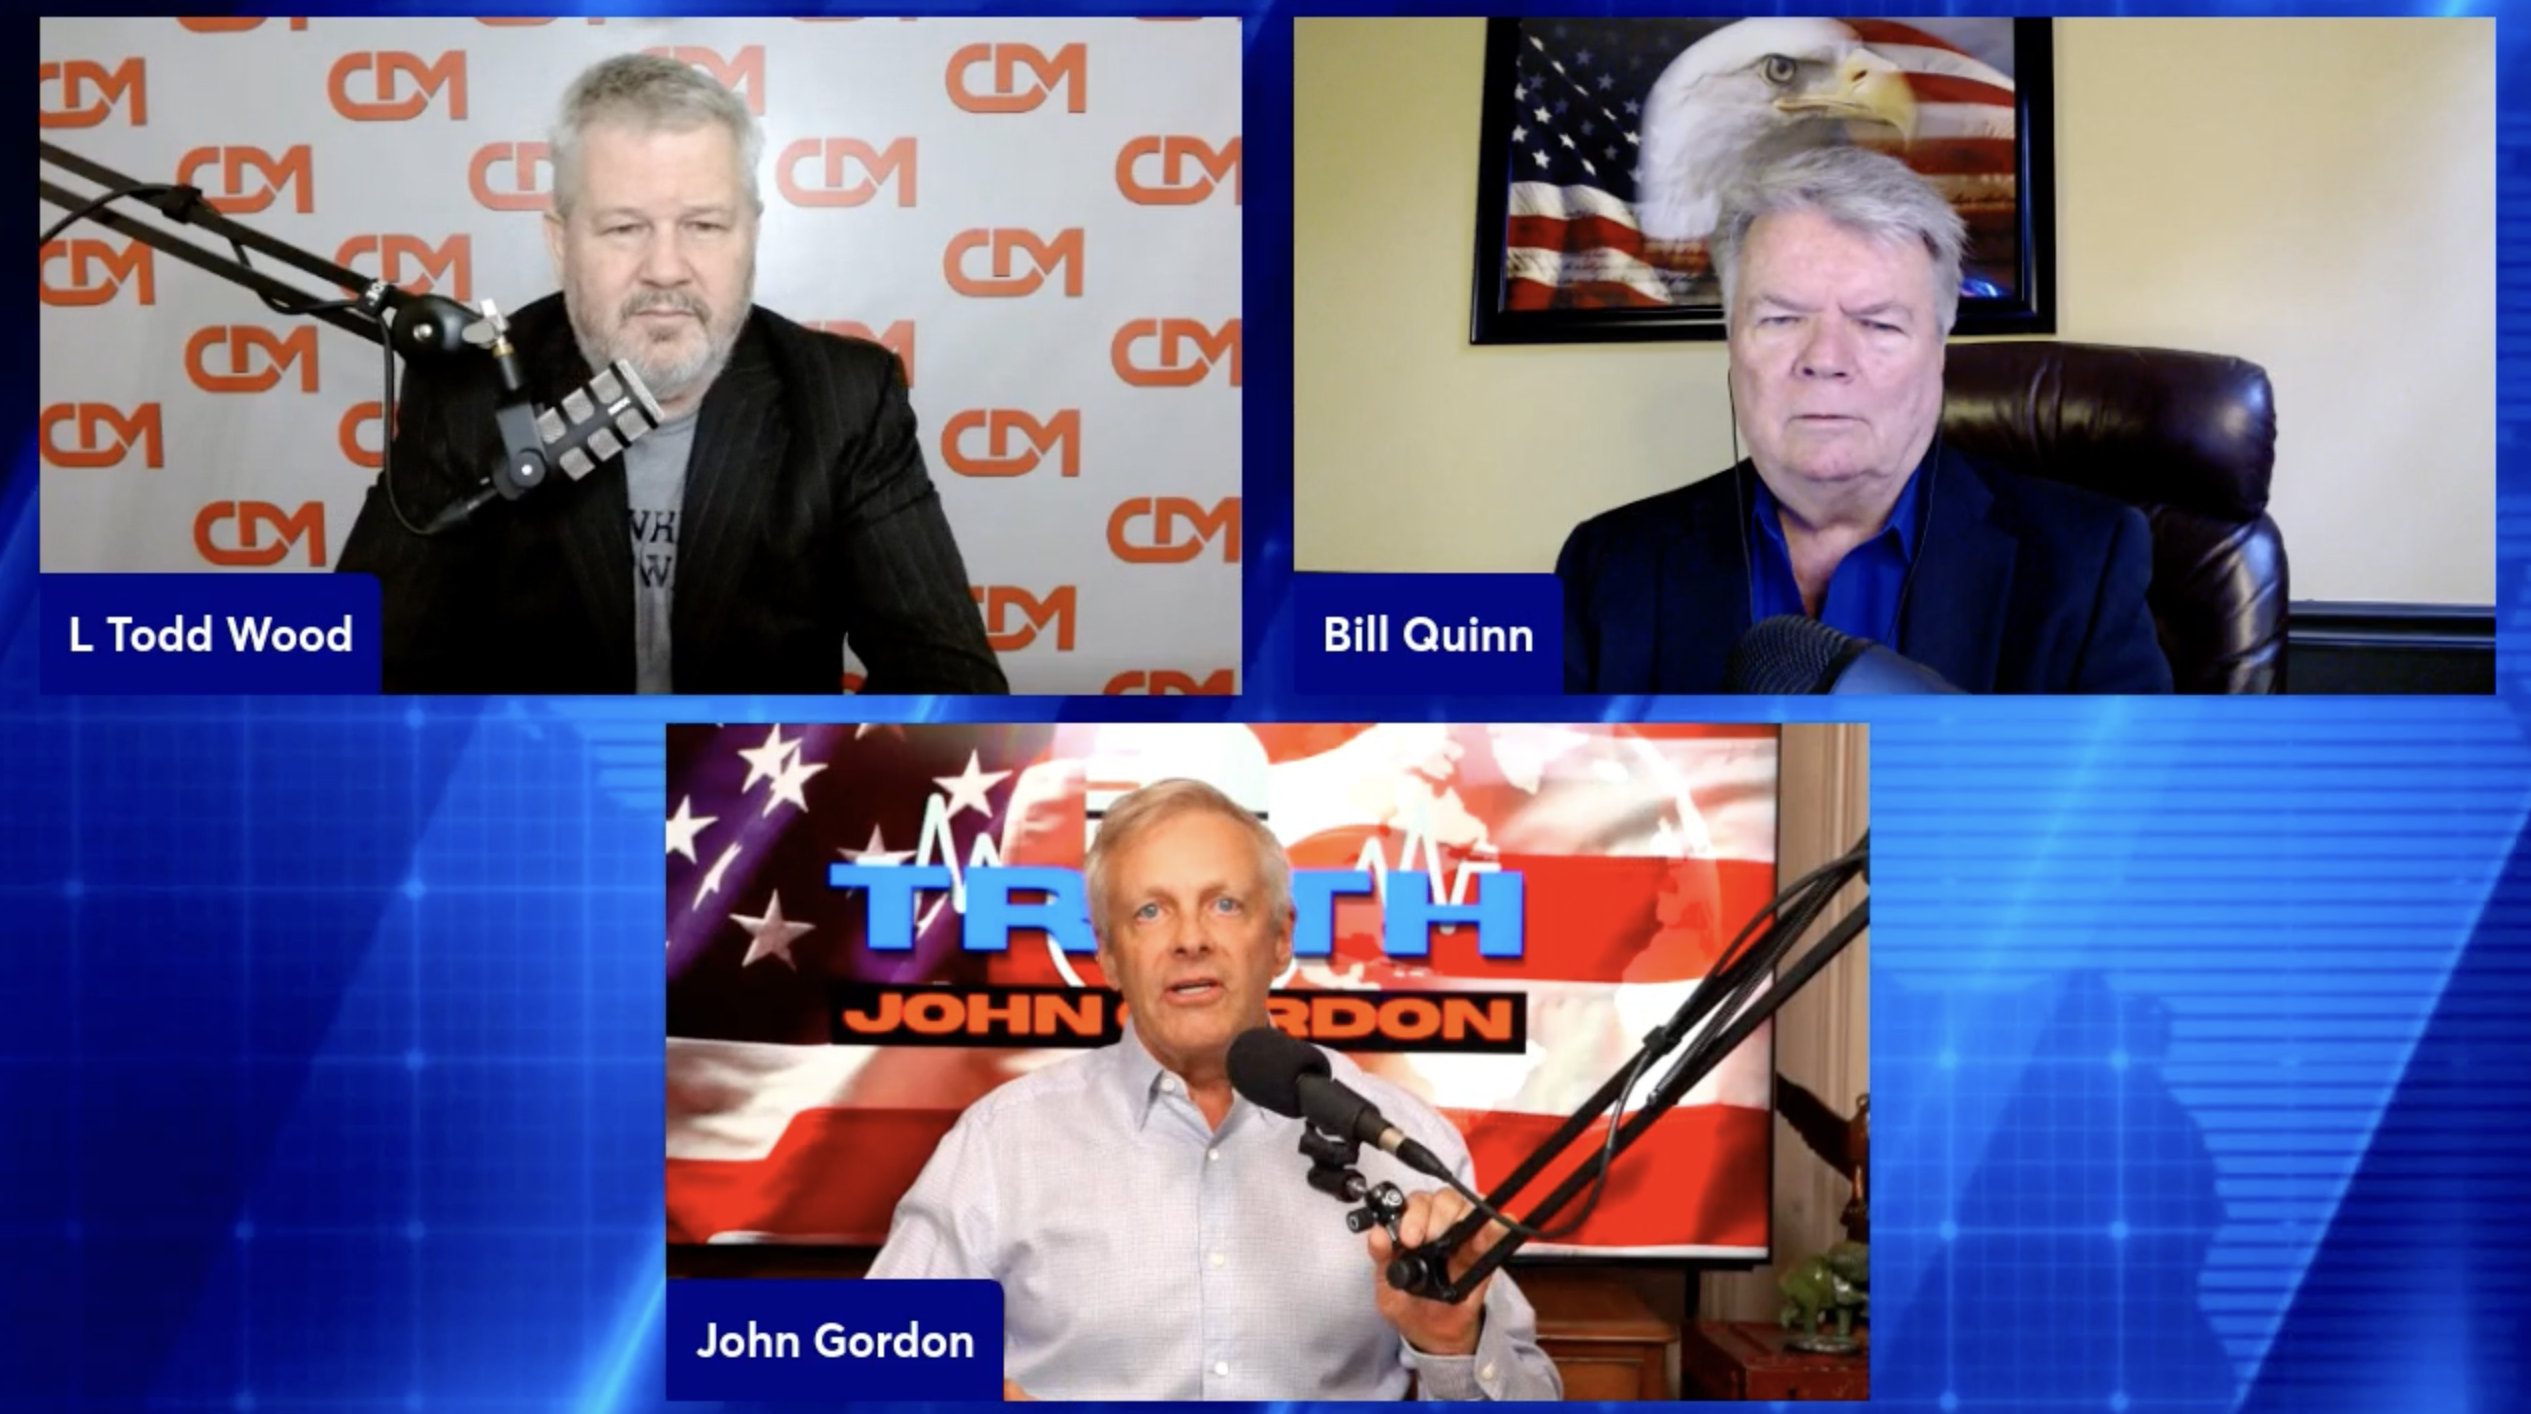 Former GA AG Candidate John Gordon Joins CDM Network With 'High Noon'